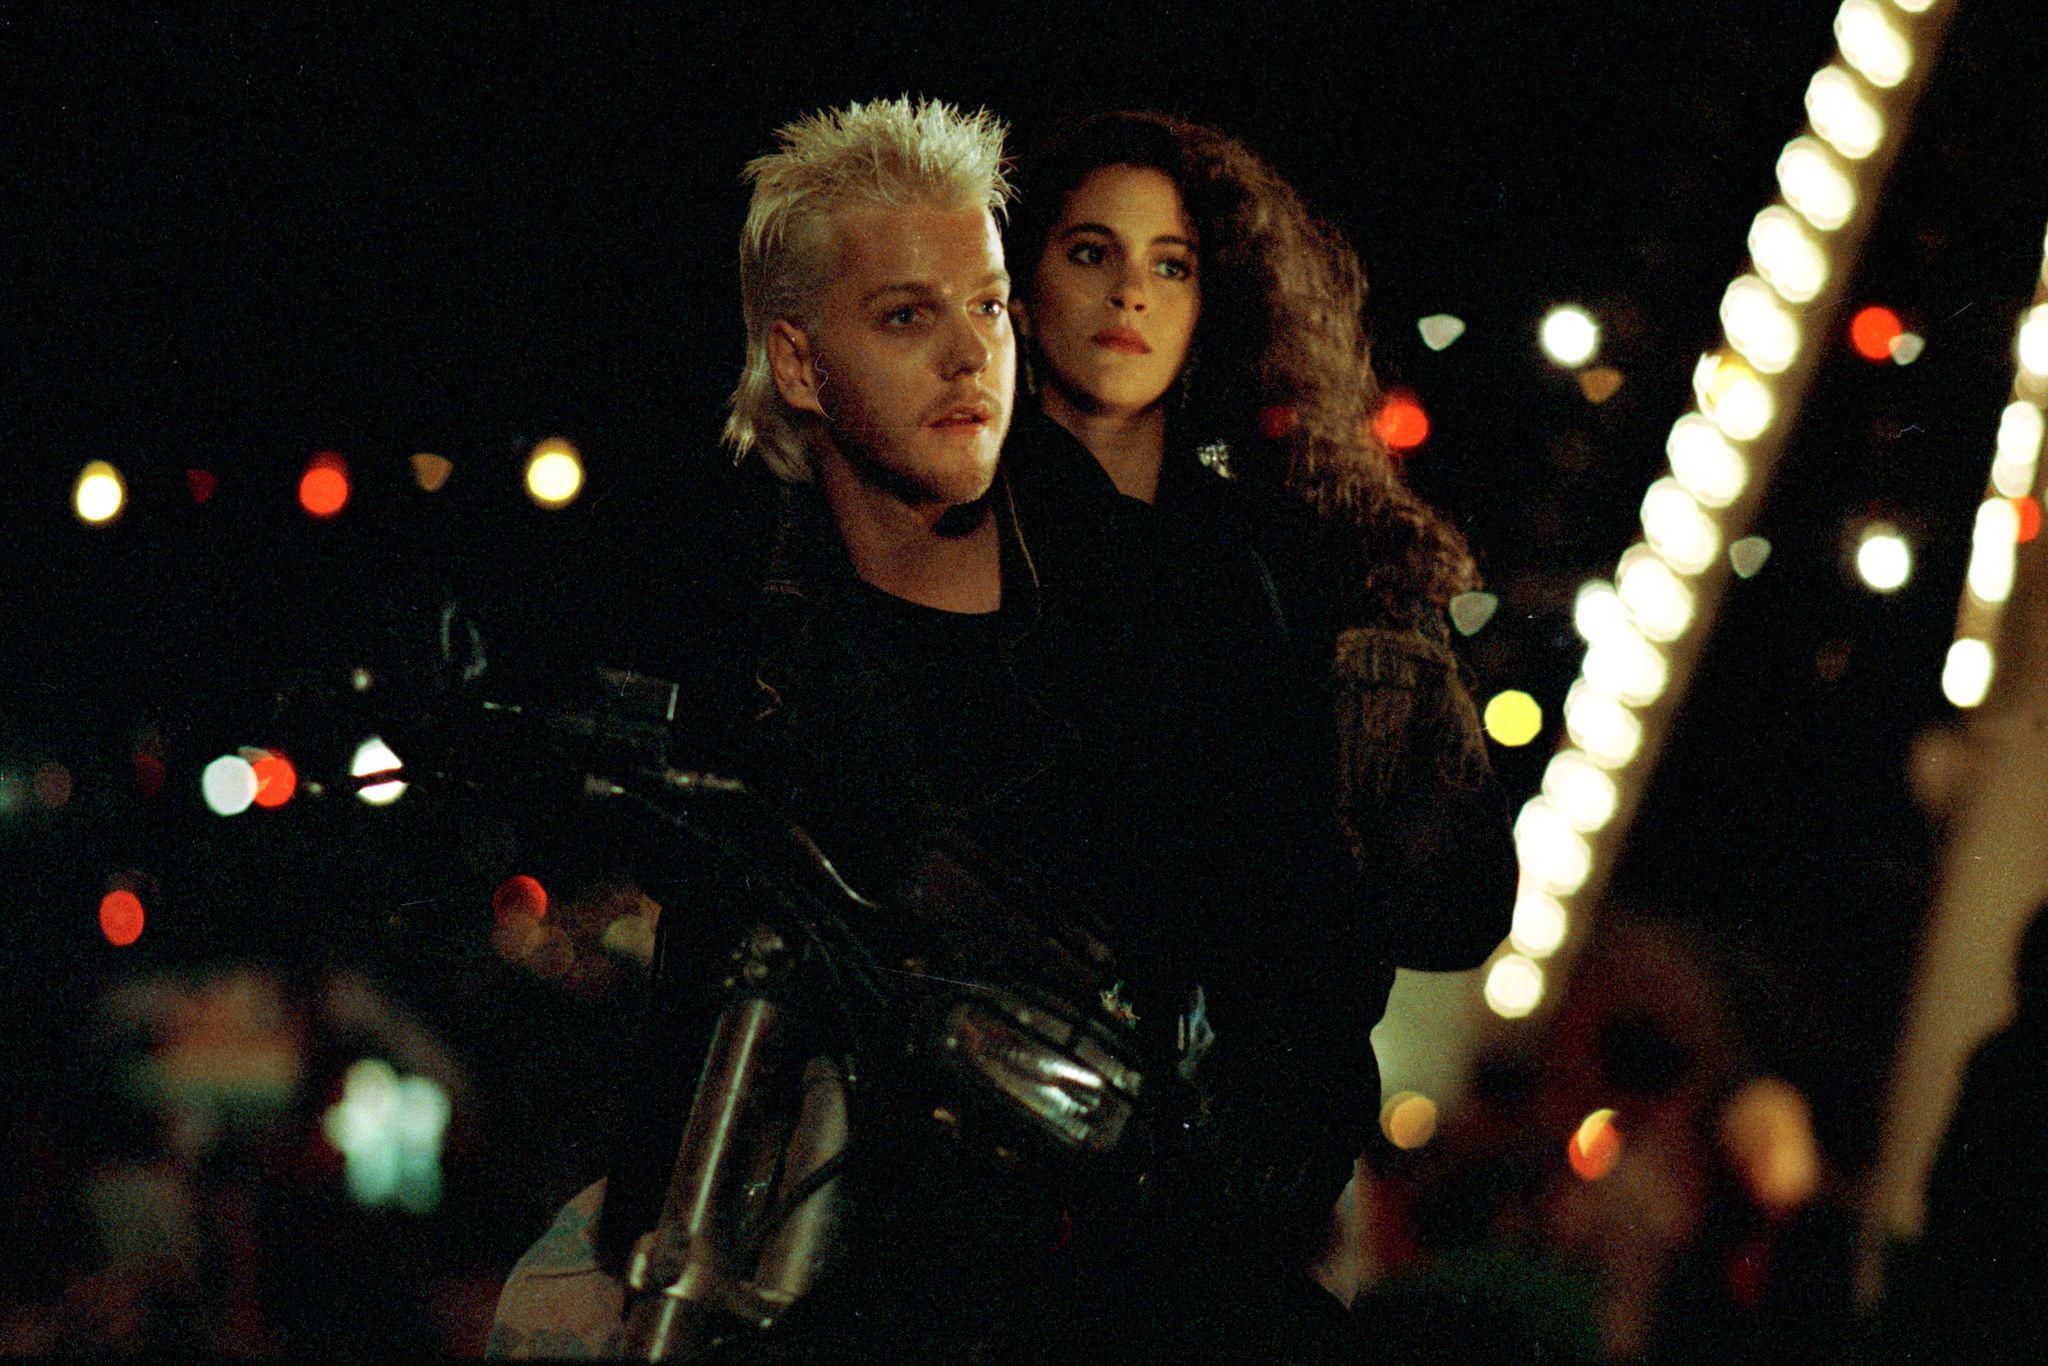 Still of Jami Gertz and Kiefer Sutherland in The Lost Boys (1987)